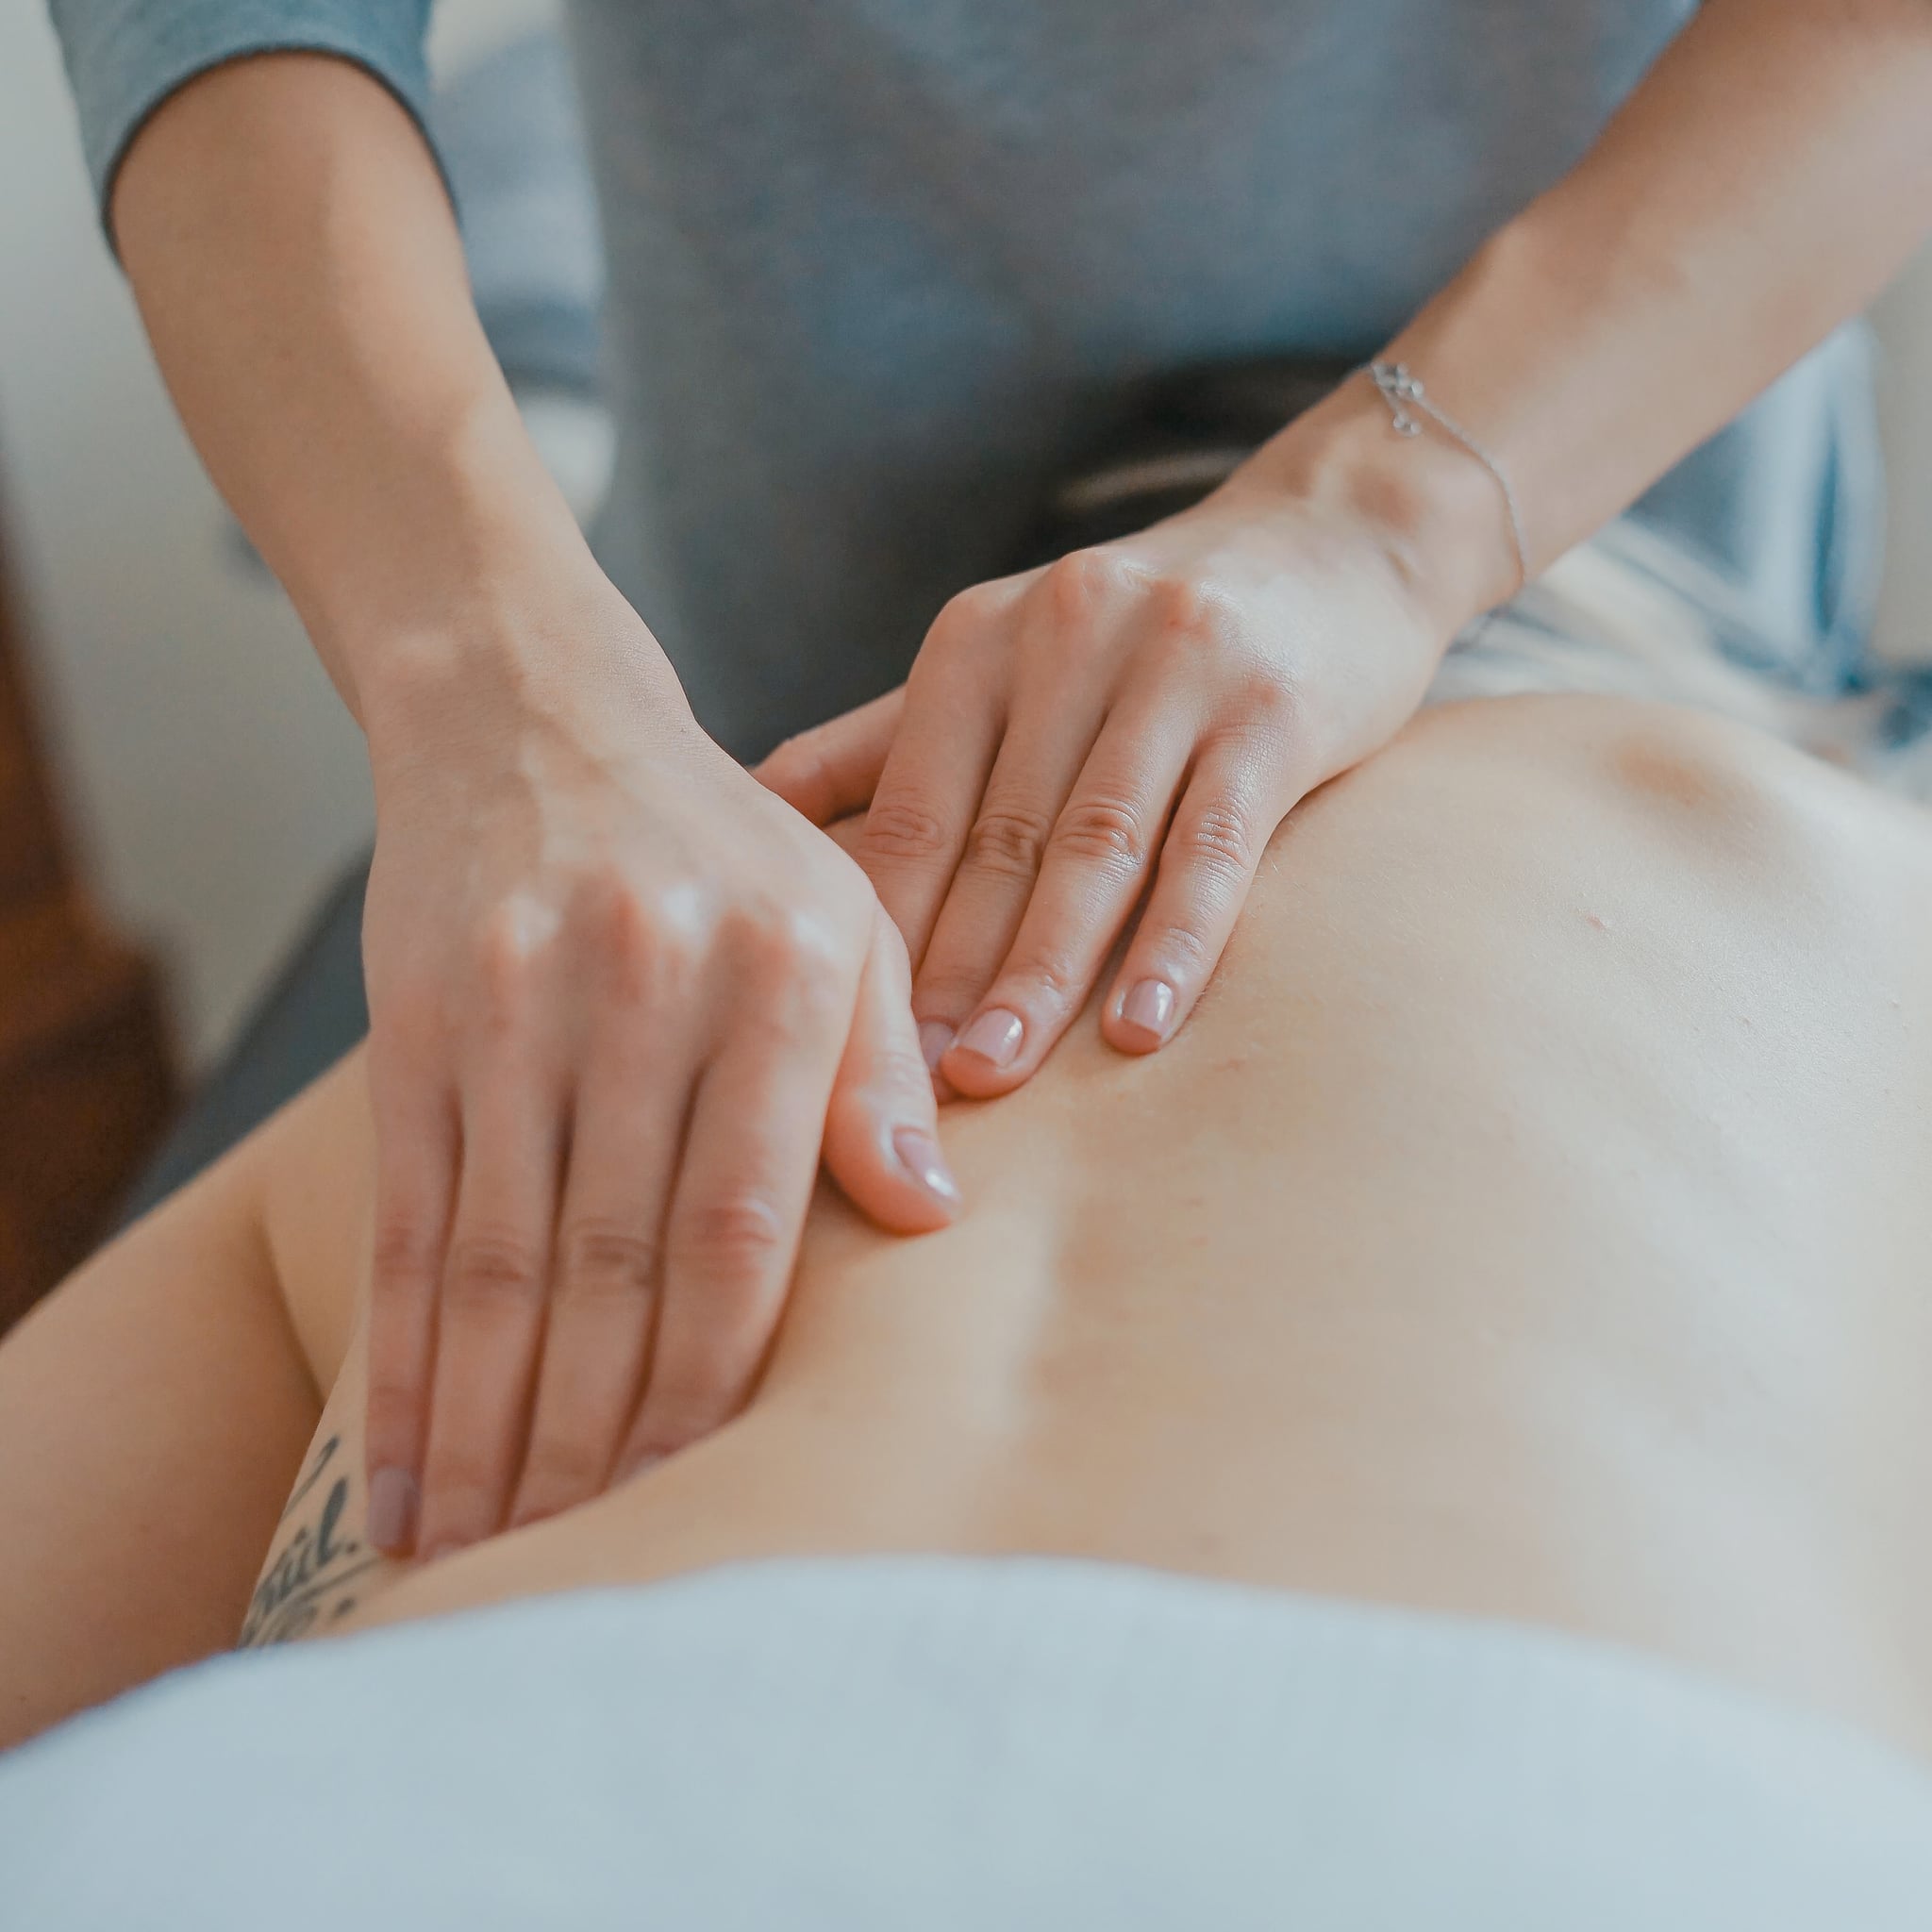 What to Know Before Your First Massage | POPSUGAR Beauty